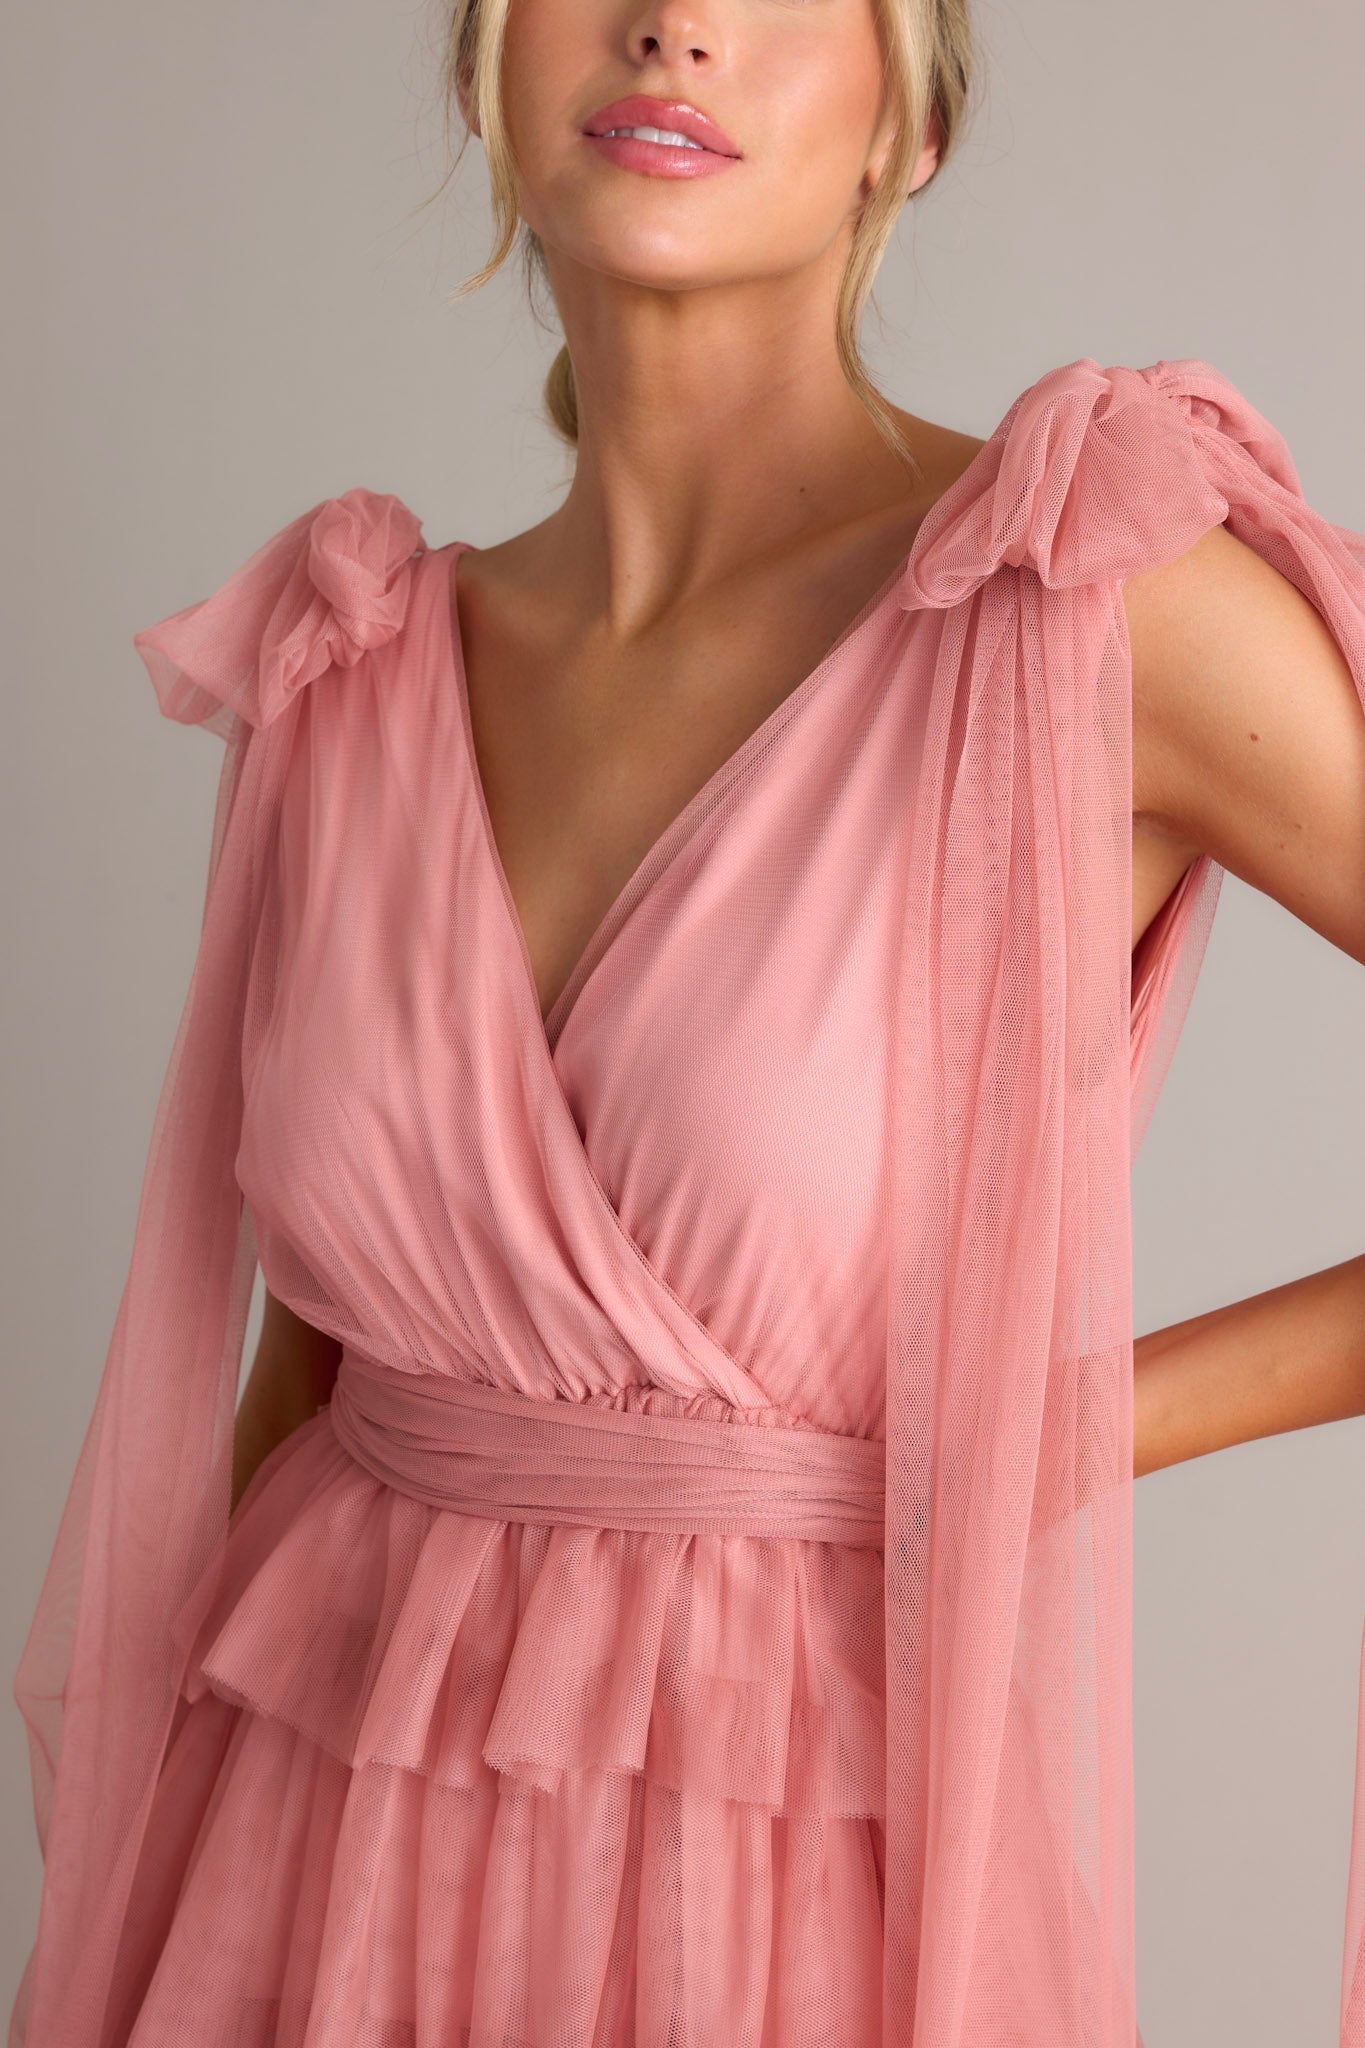 Close up view of this pink dress featuring a flattering v-neckline, graceful fabric trailing from the shoulders, a chic self-tie waist belt, and multiple tiers and layers of ethereal tulle for a whimsical touch.